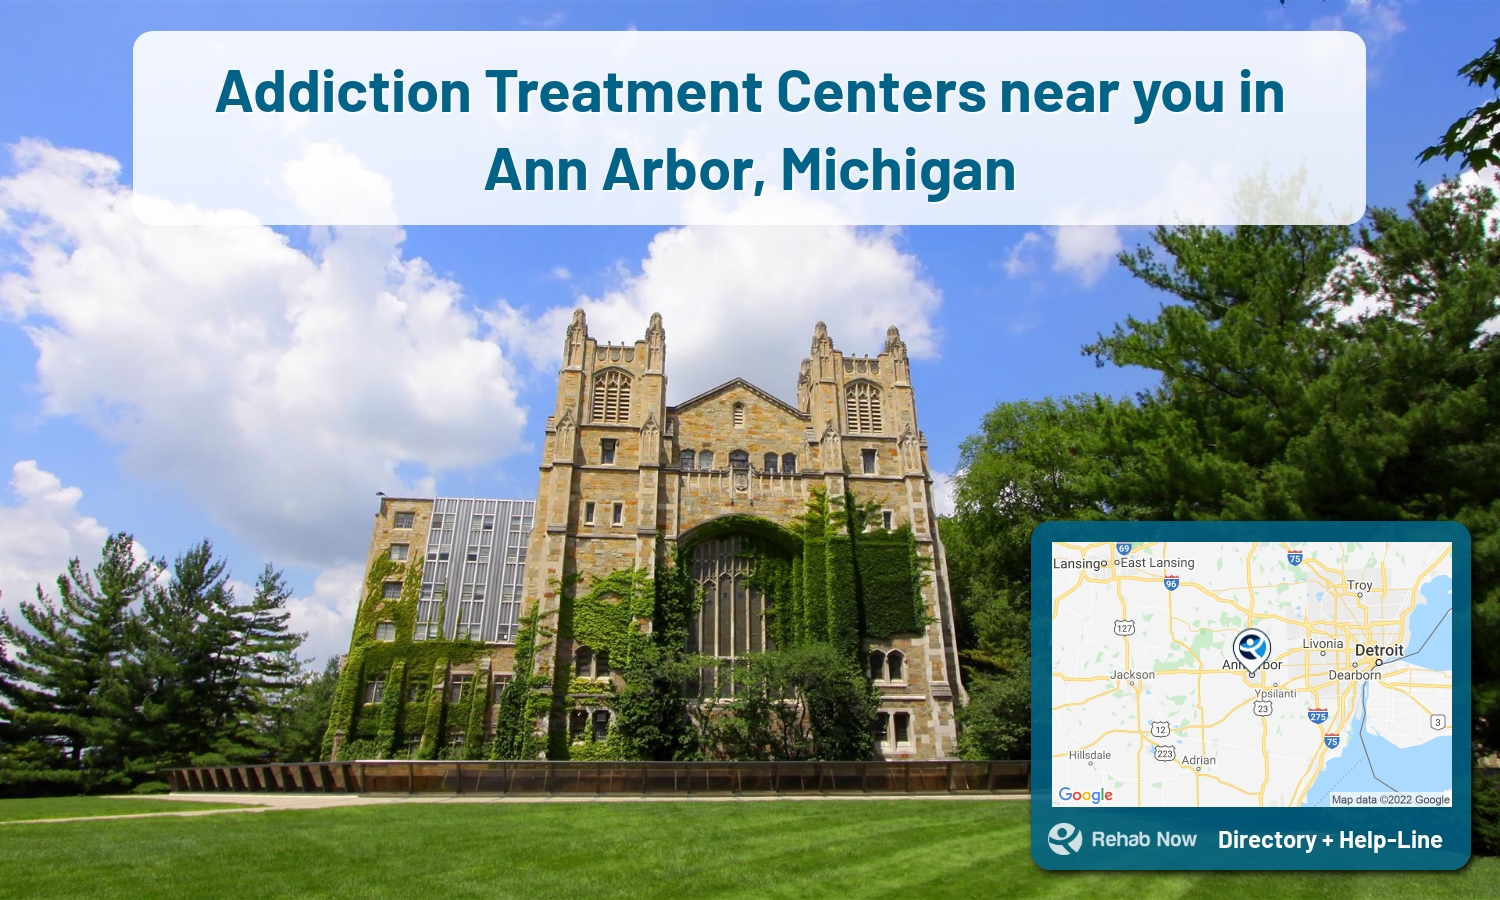 Ann Arbor, MI Treatment Centers. Find drug rehab in Ann Arbor, Michigan, or detox and treatment programs. Get the right help now!